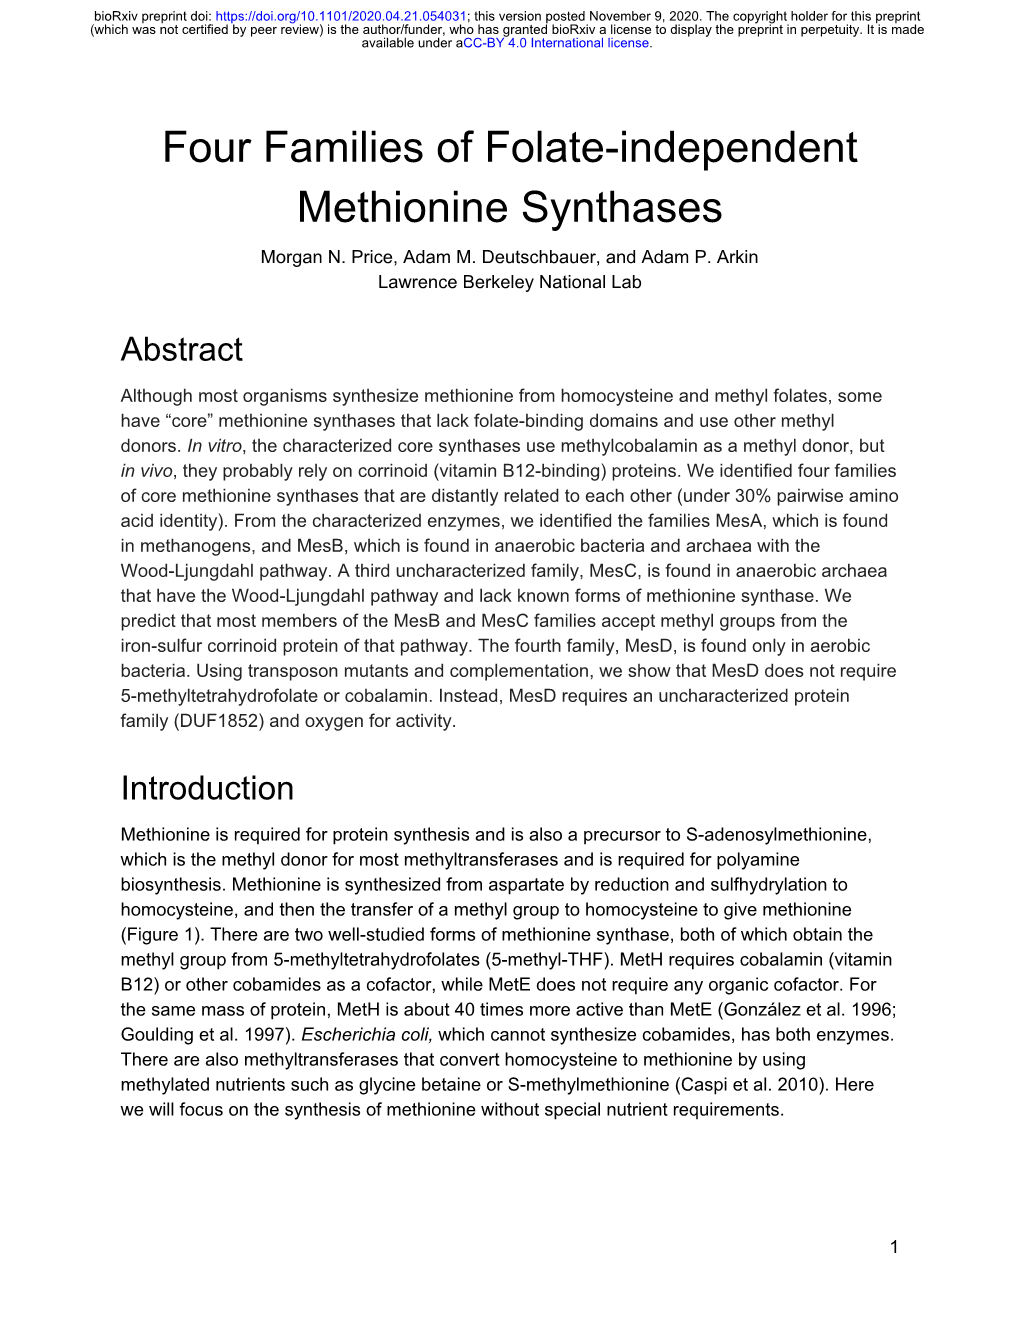 Four Families of Folate-Independent Methionine Synthases Morgan N